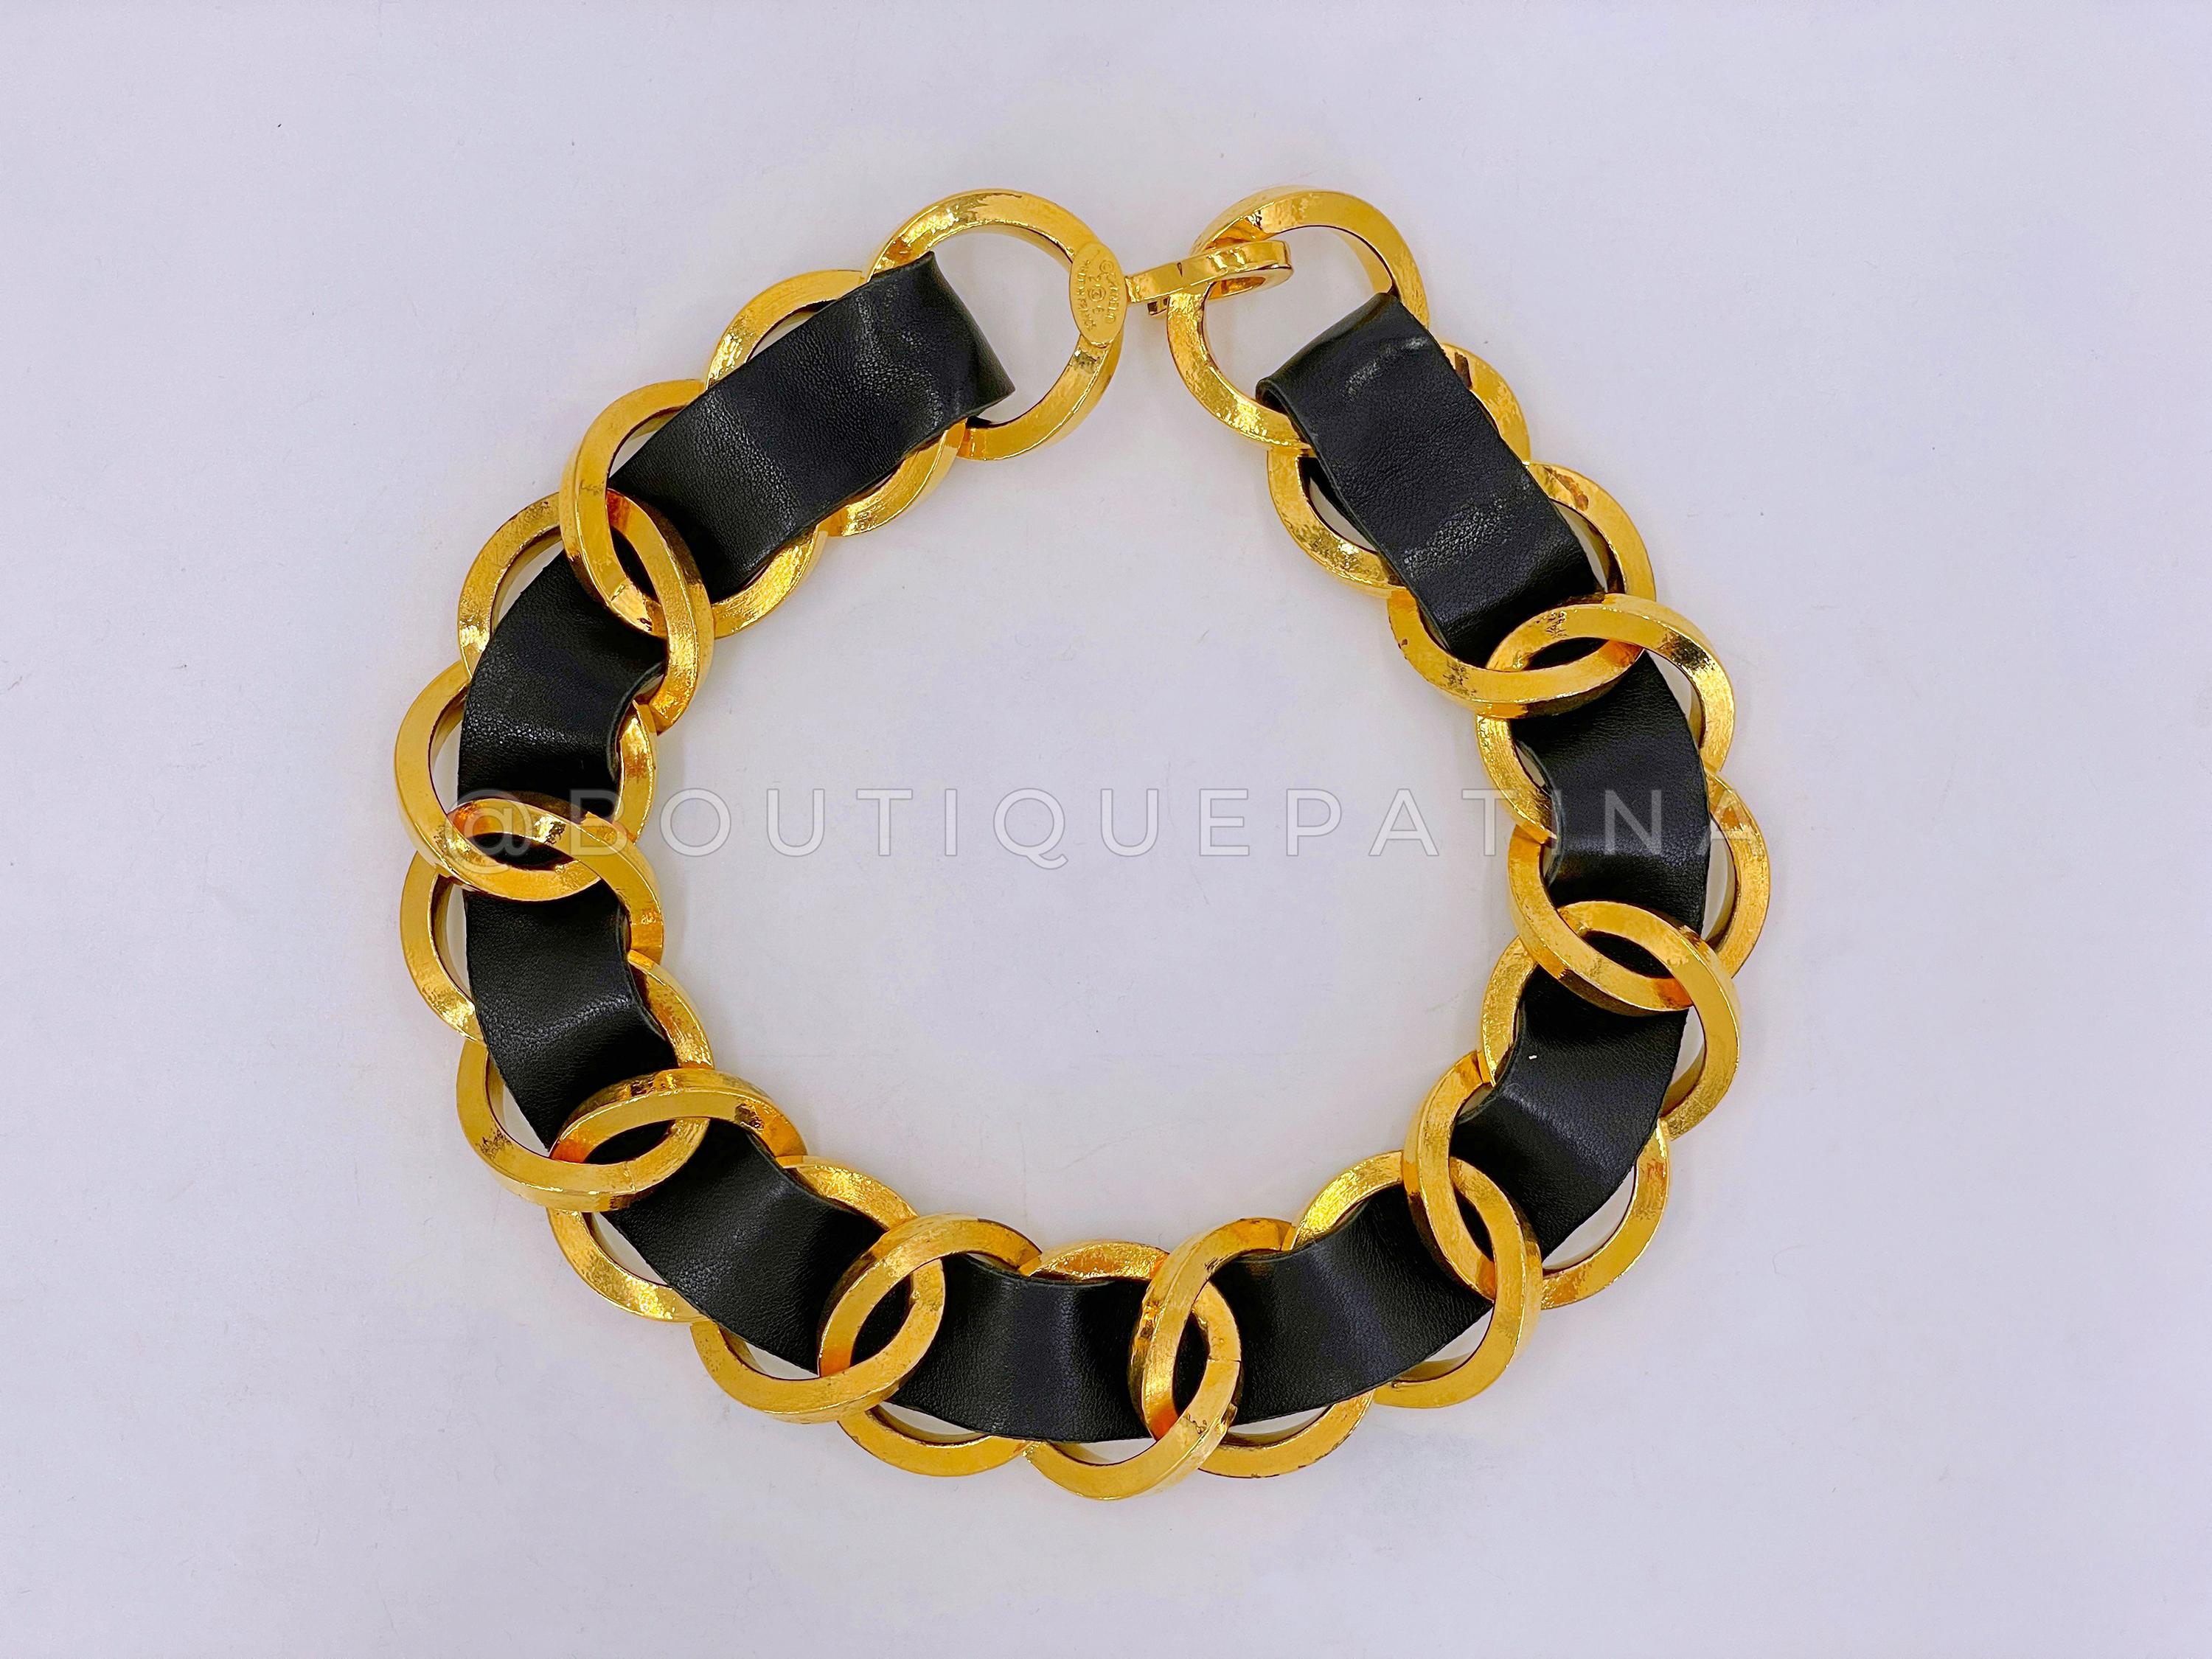 Store item: 66845
Rare Chanel Vintage Collection 26 Chunky Woven Chain Choker Necklace 24k gold plated

As seen on Linda Evangelista in her campaign ads for Lagerfeld's 